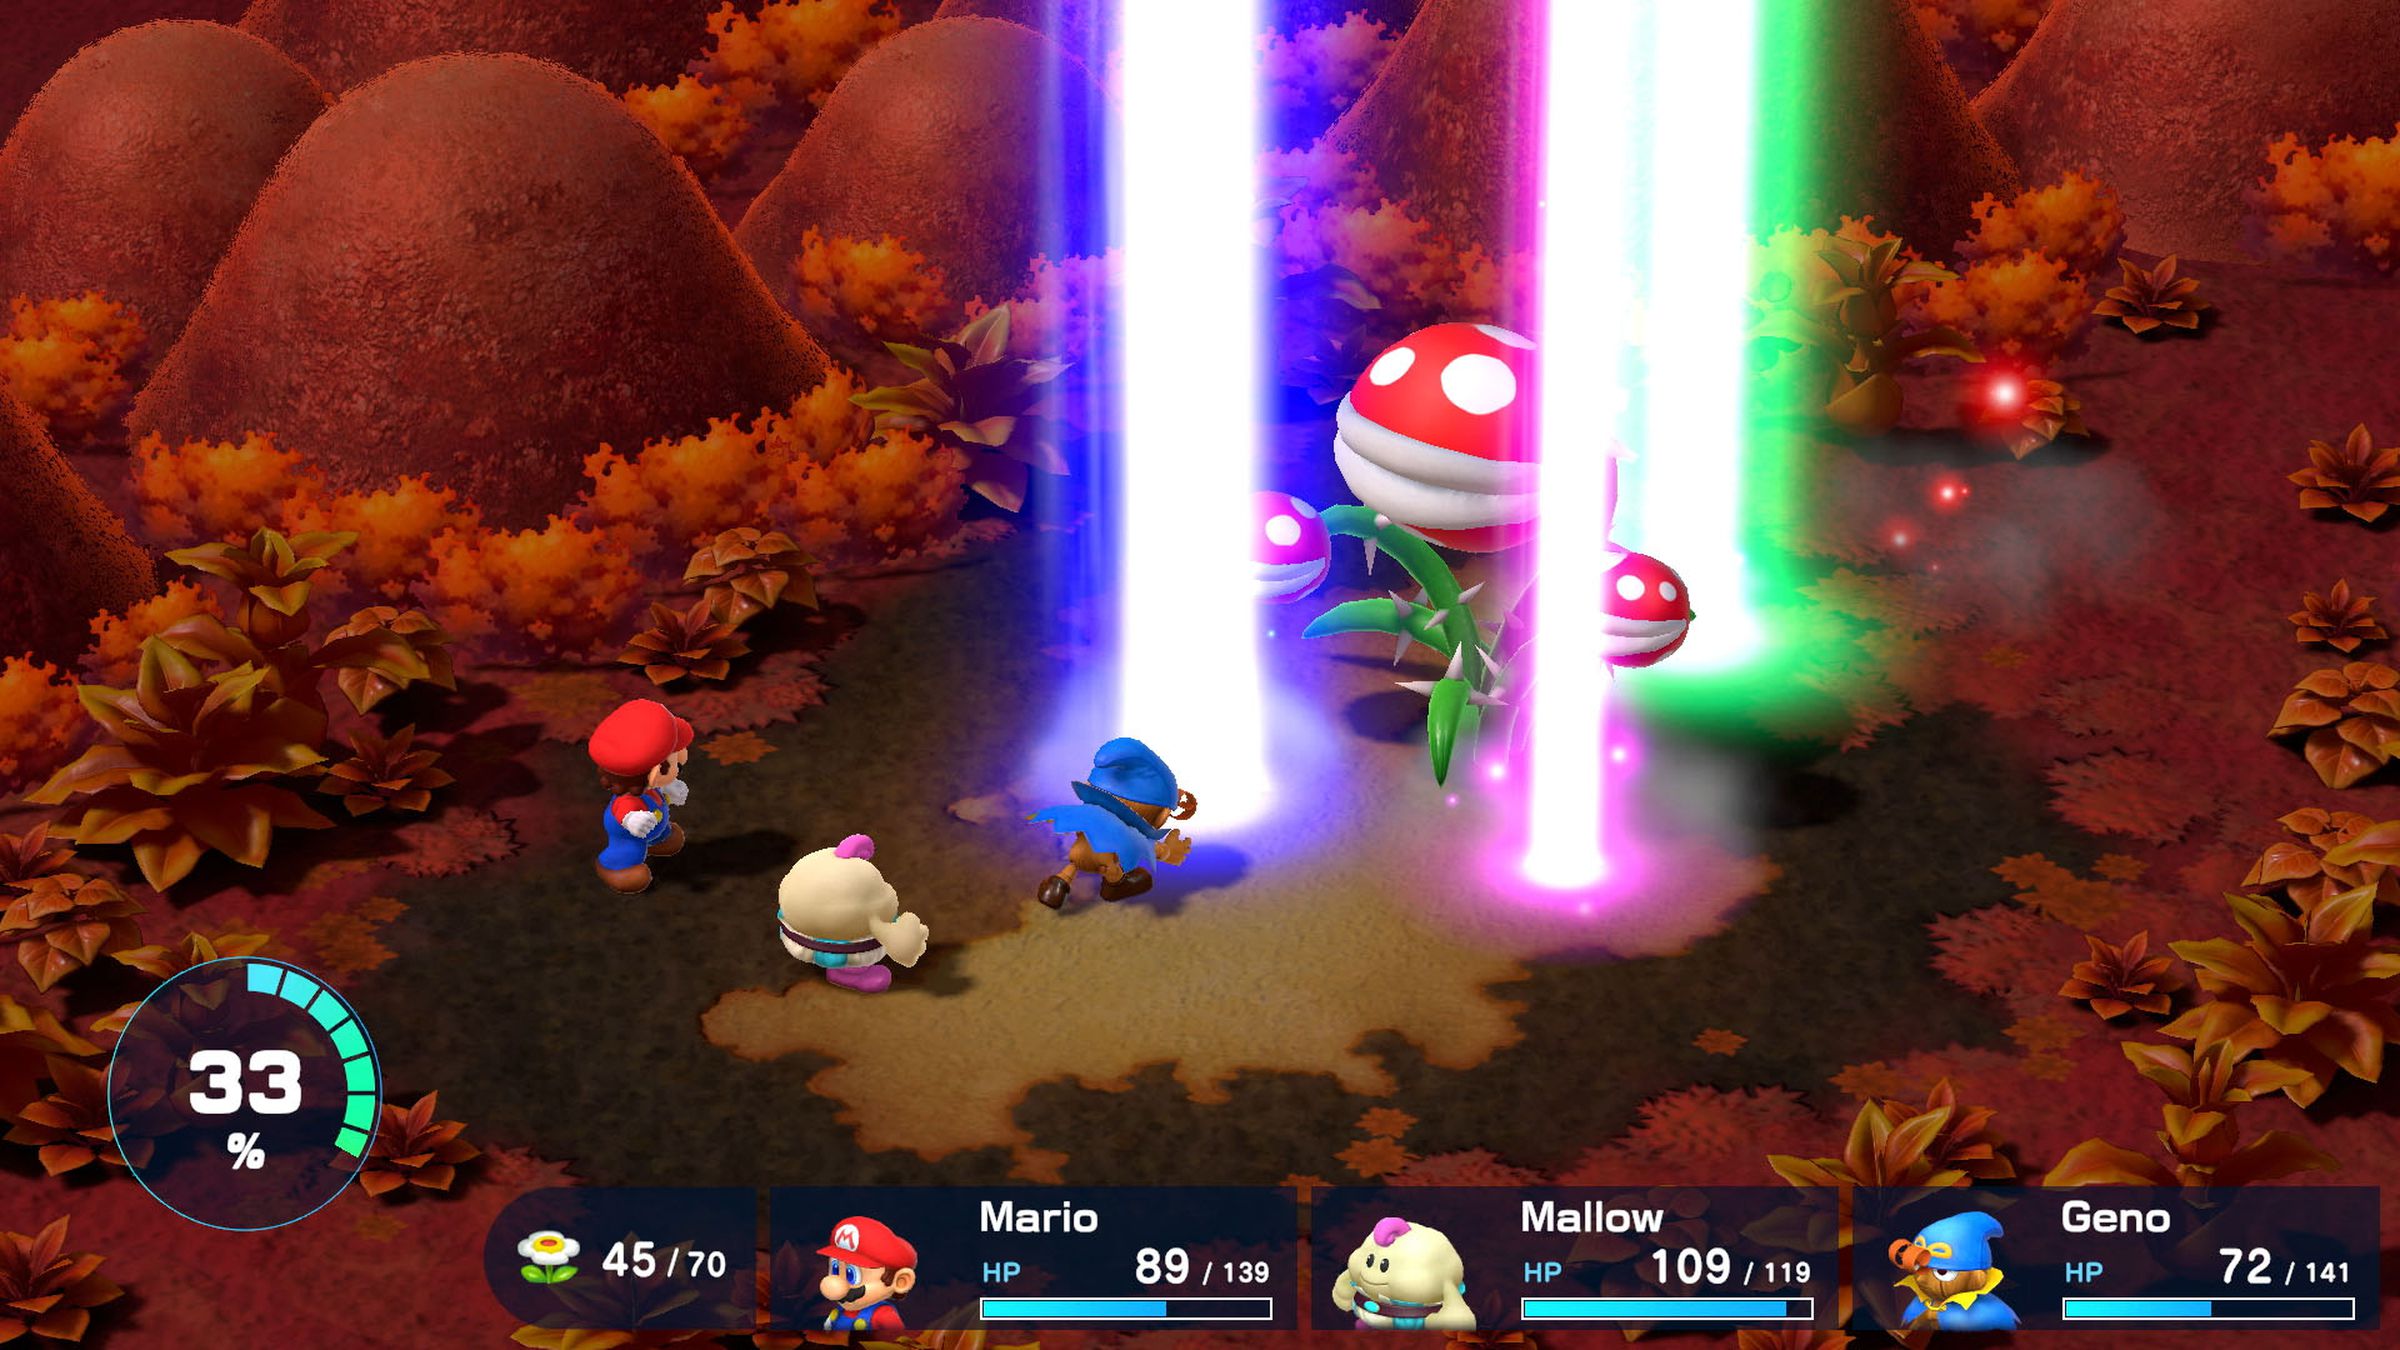 A screenshot from the video game Super Mario RPG.